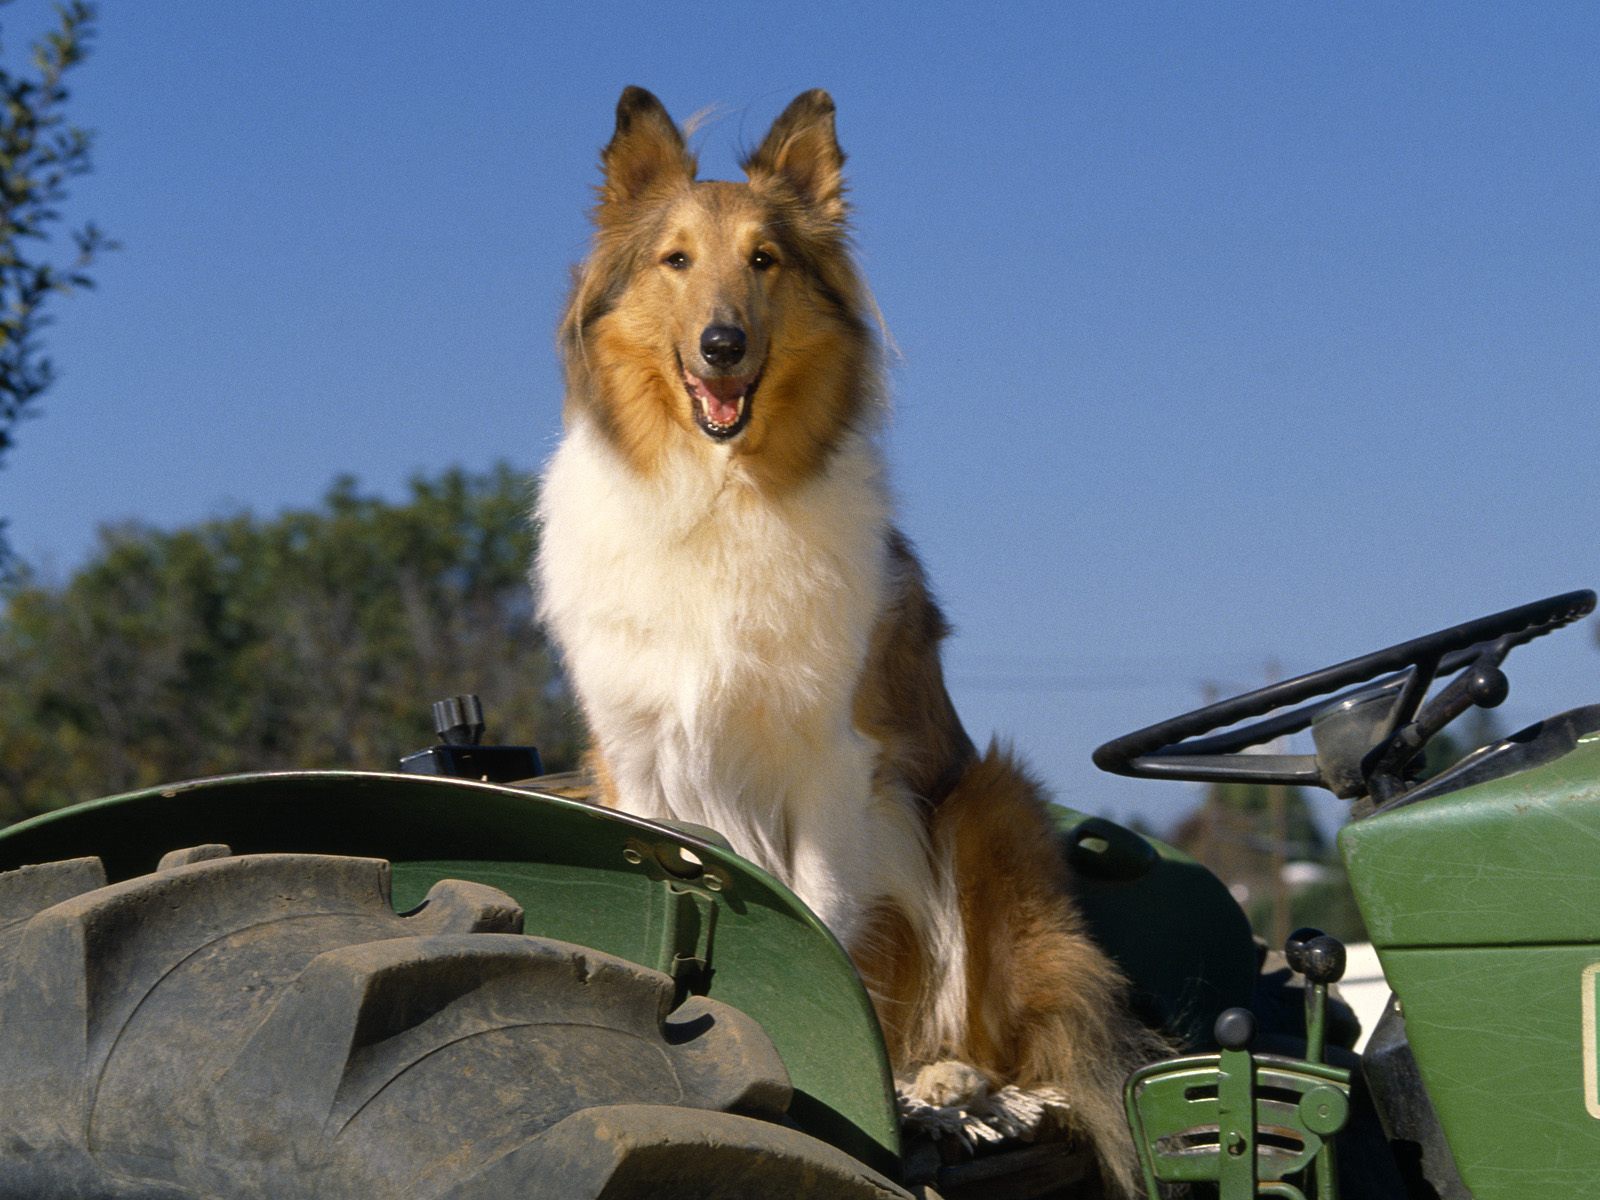 Collie dog on the tractor